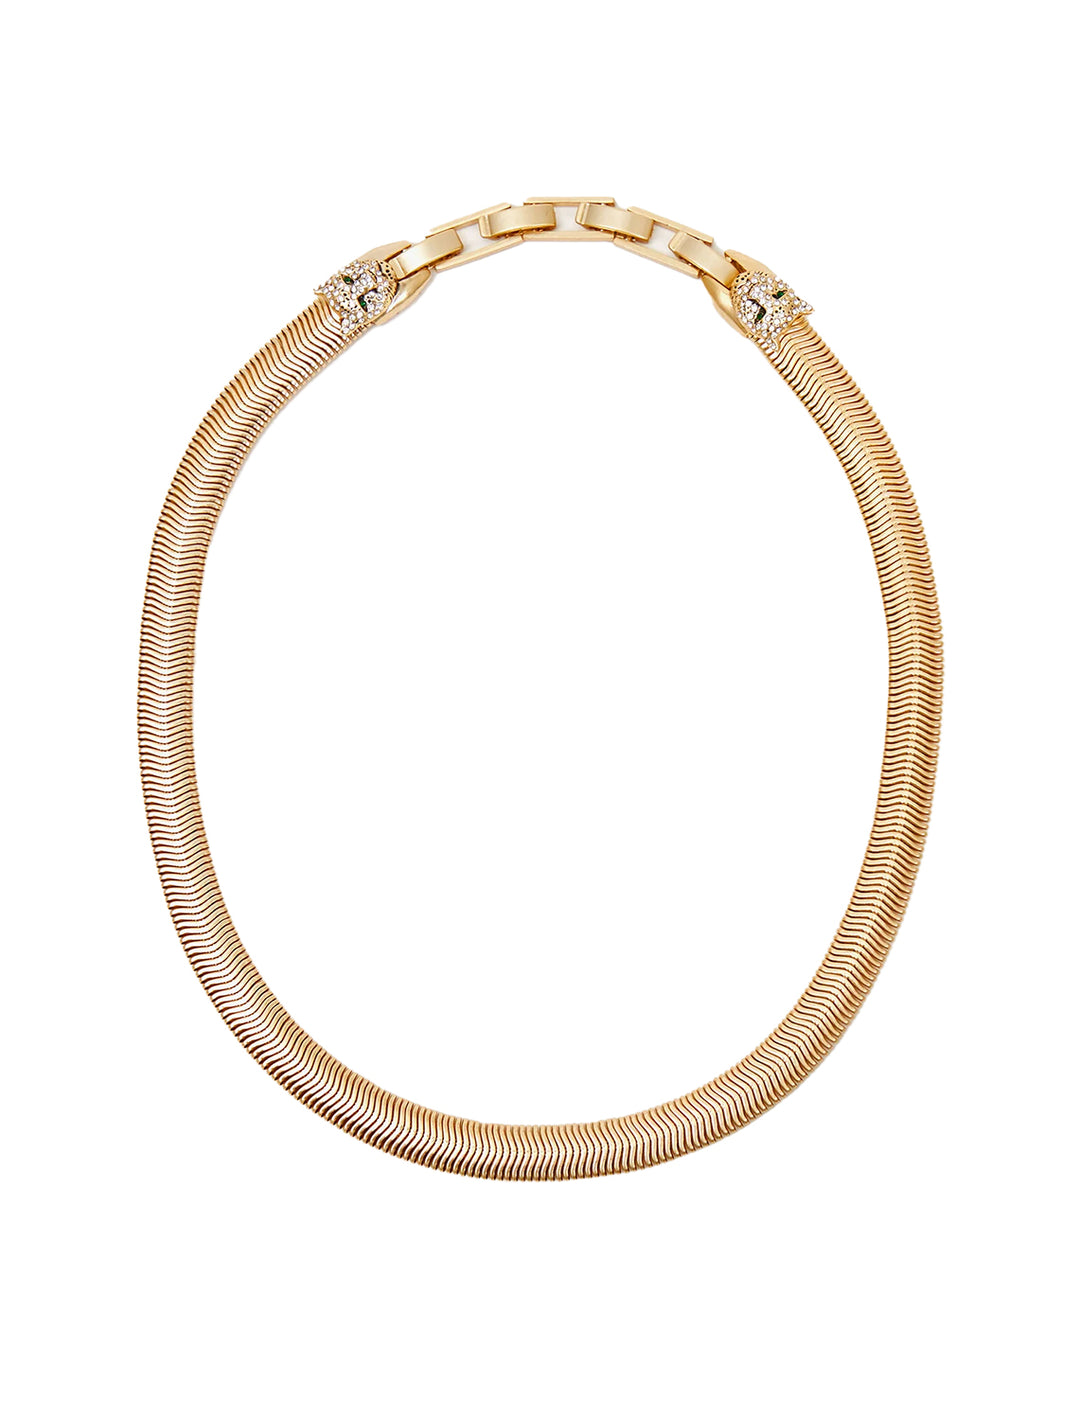 Overhead view of Clare V.'s snake chain collar in vintage gold.